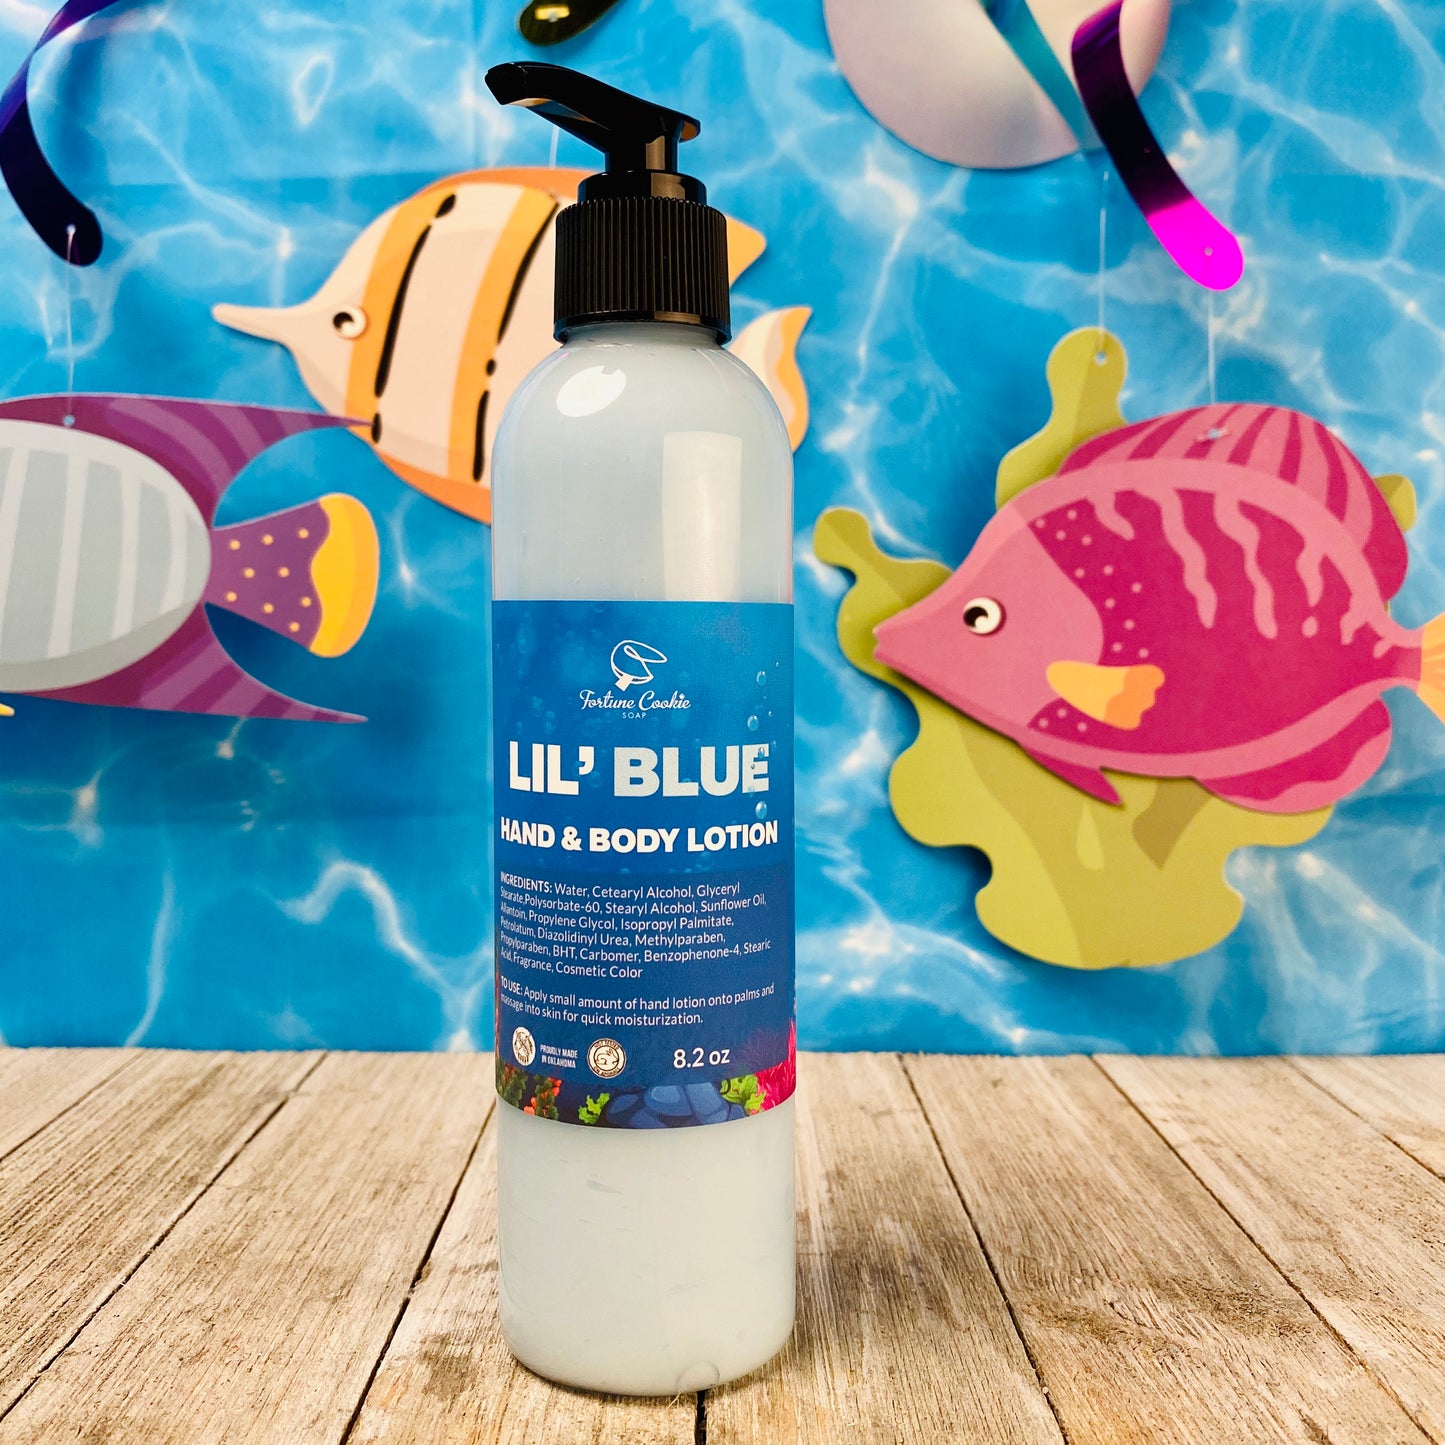 LIL' BLUE Hand & Body Lotion